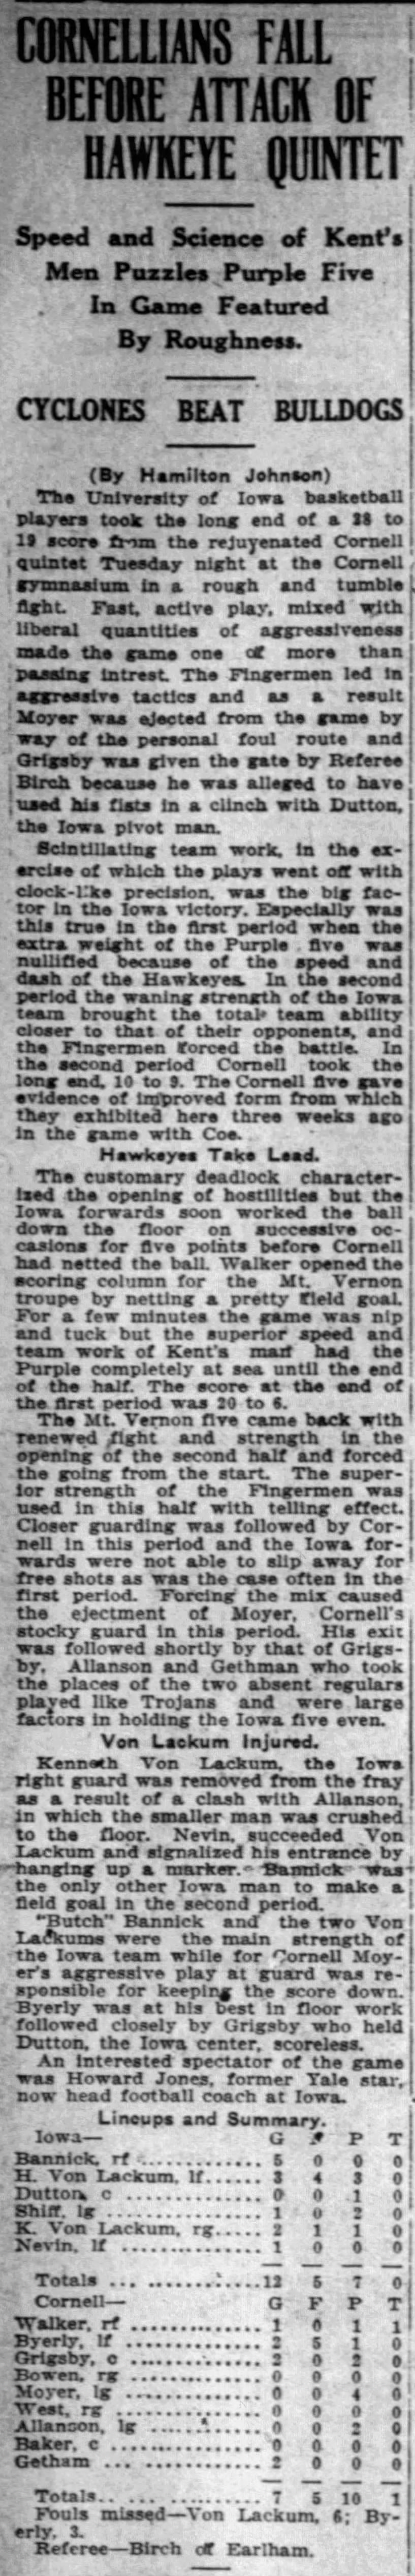 Cornell loses to Iowa 28-19 in basketball on 2/8/1916